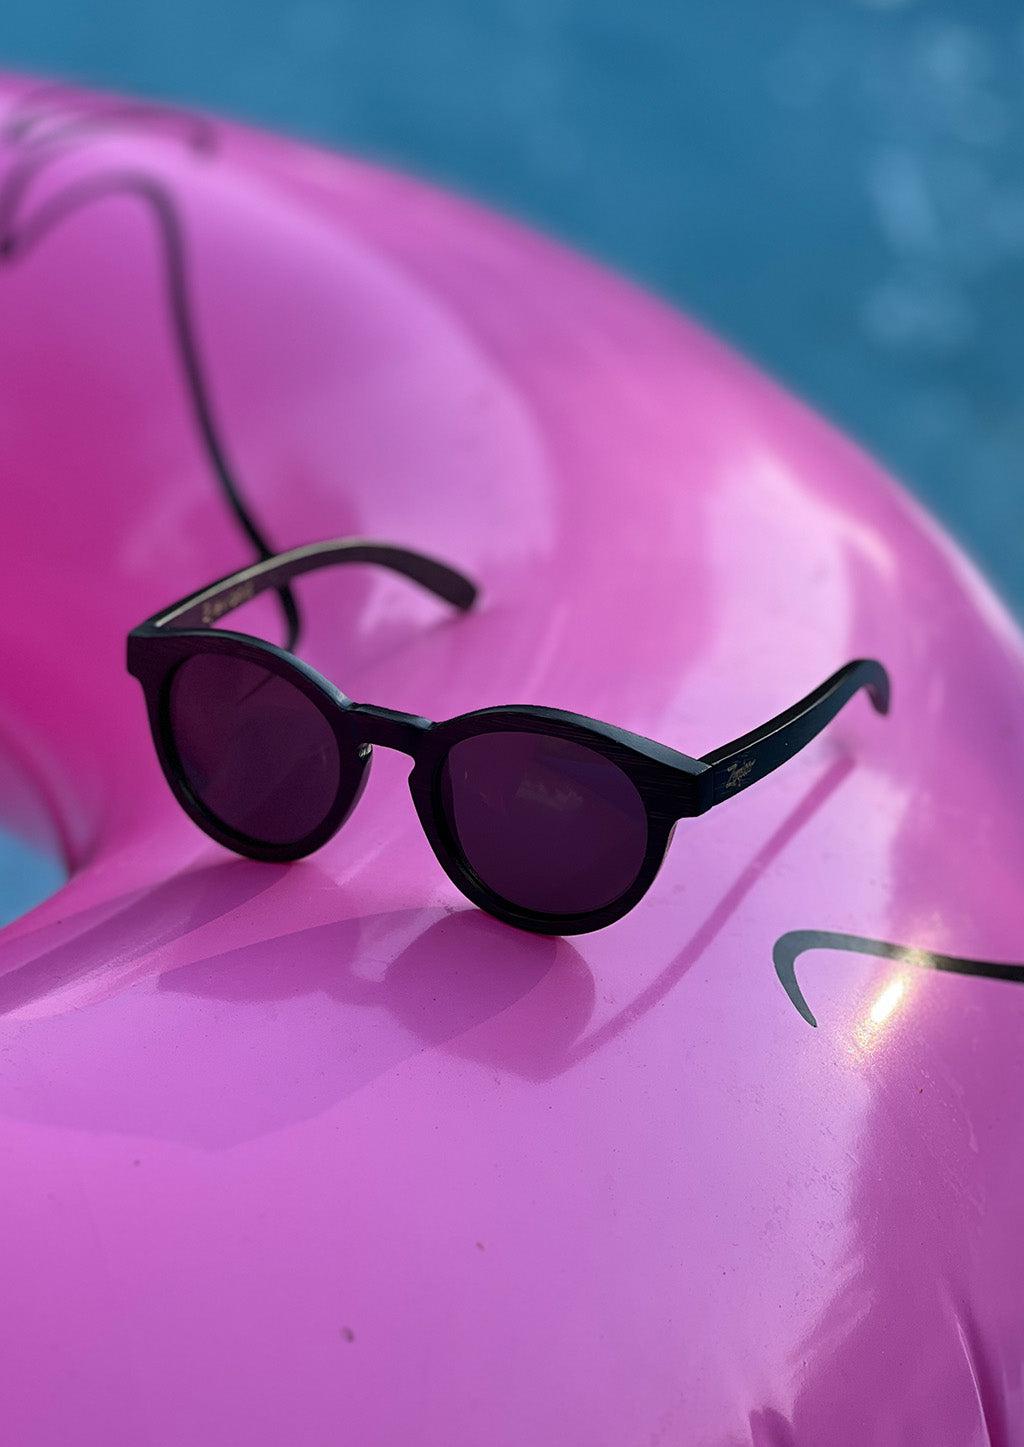 Our handmade round wooden sunglasses called midnight bamboo. Another photo by the pool in Sweden.